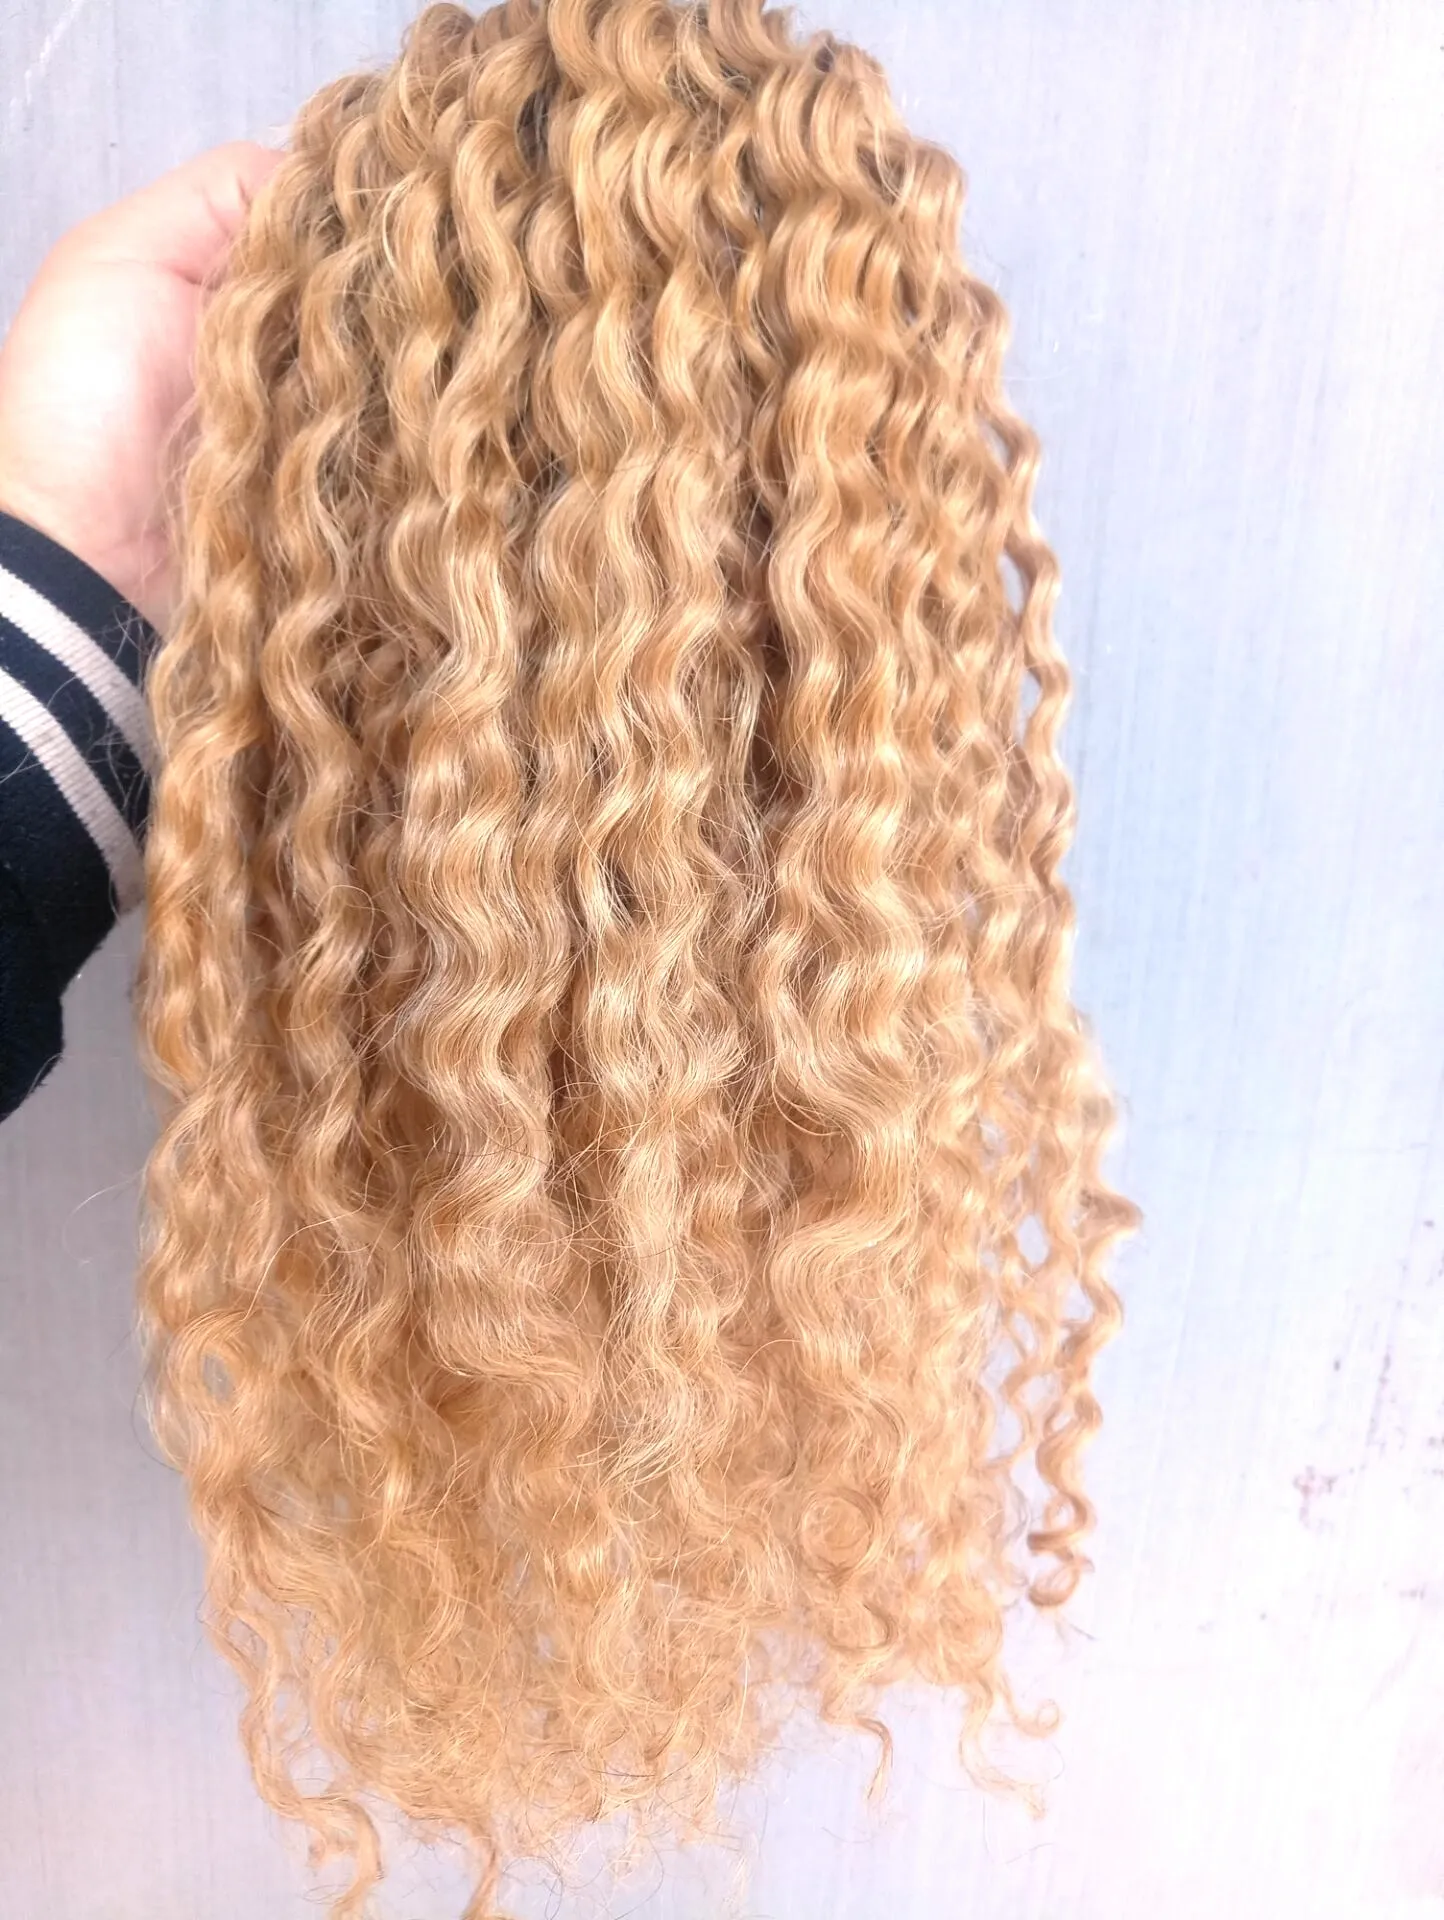 New Arrive Brazilian Human Virgin Remy Curly Hair Extensions Dark Blonde 27# Color Hair Weft 2-3Bundles For Full Head